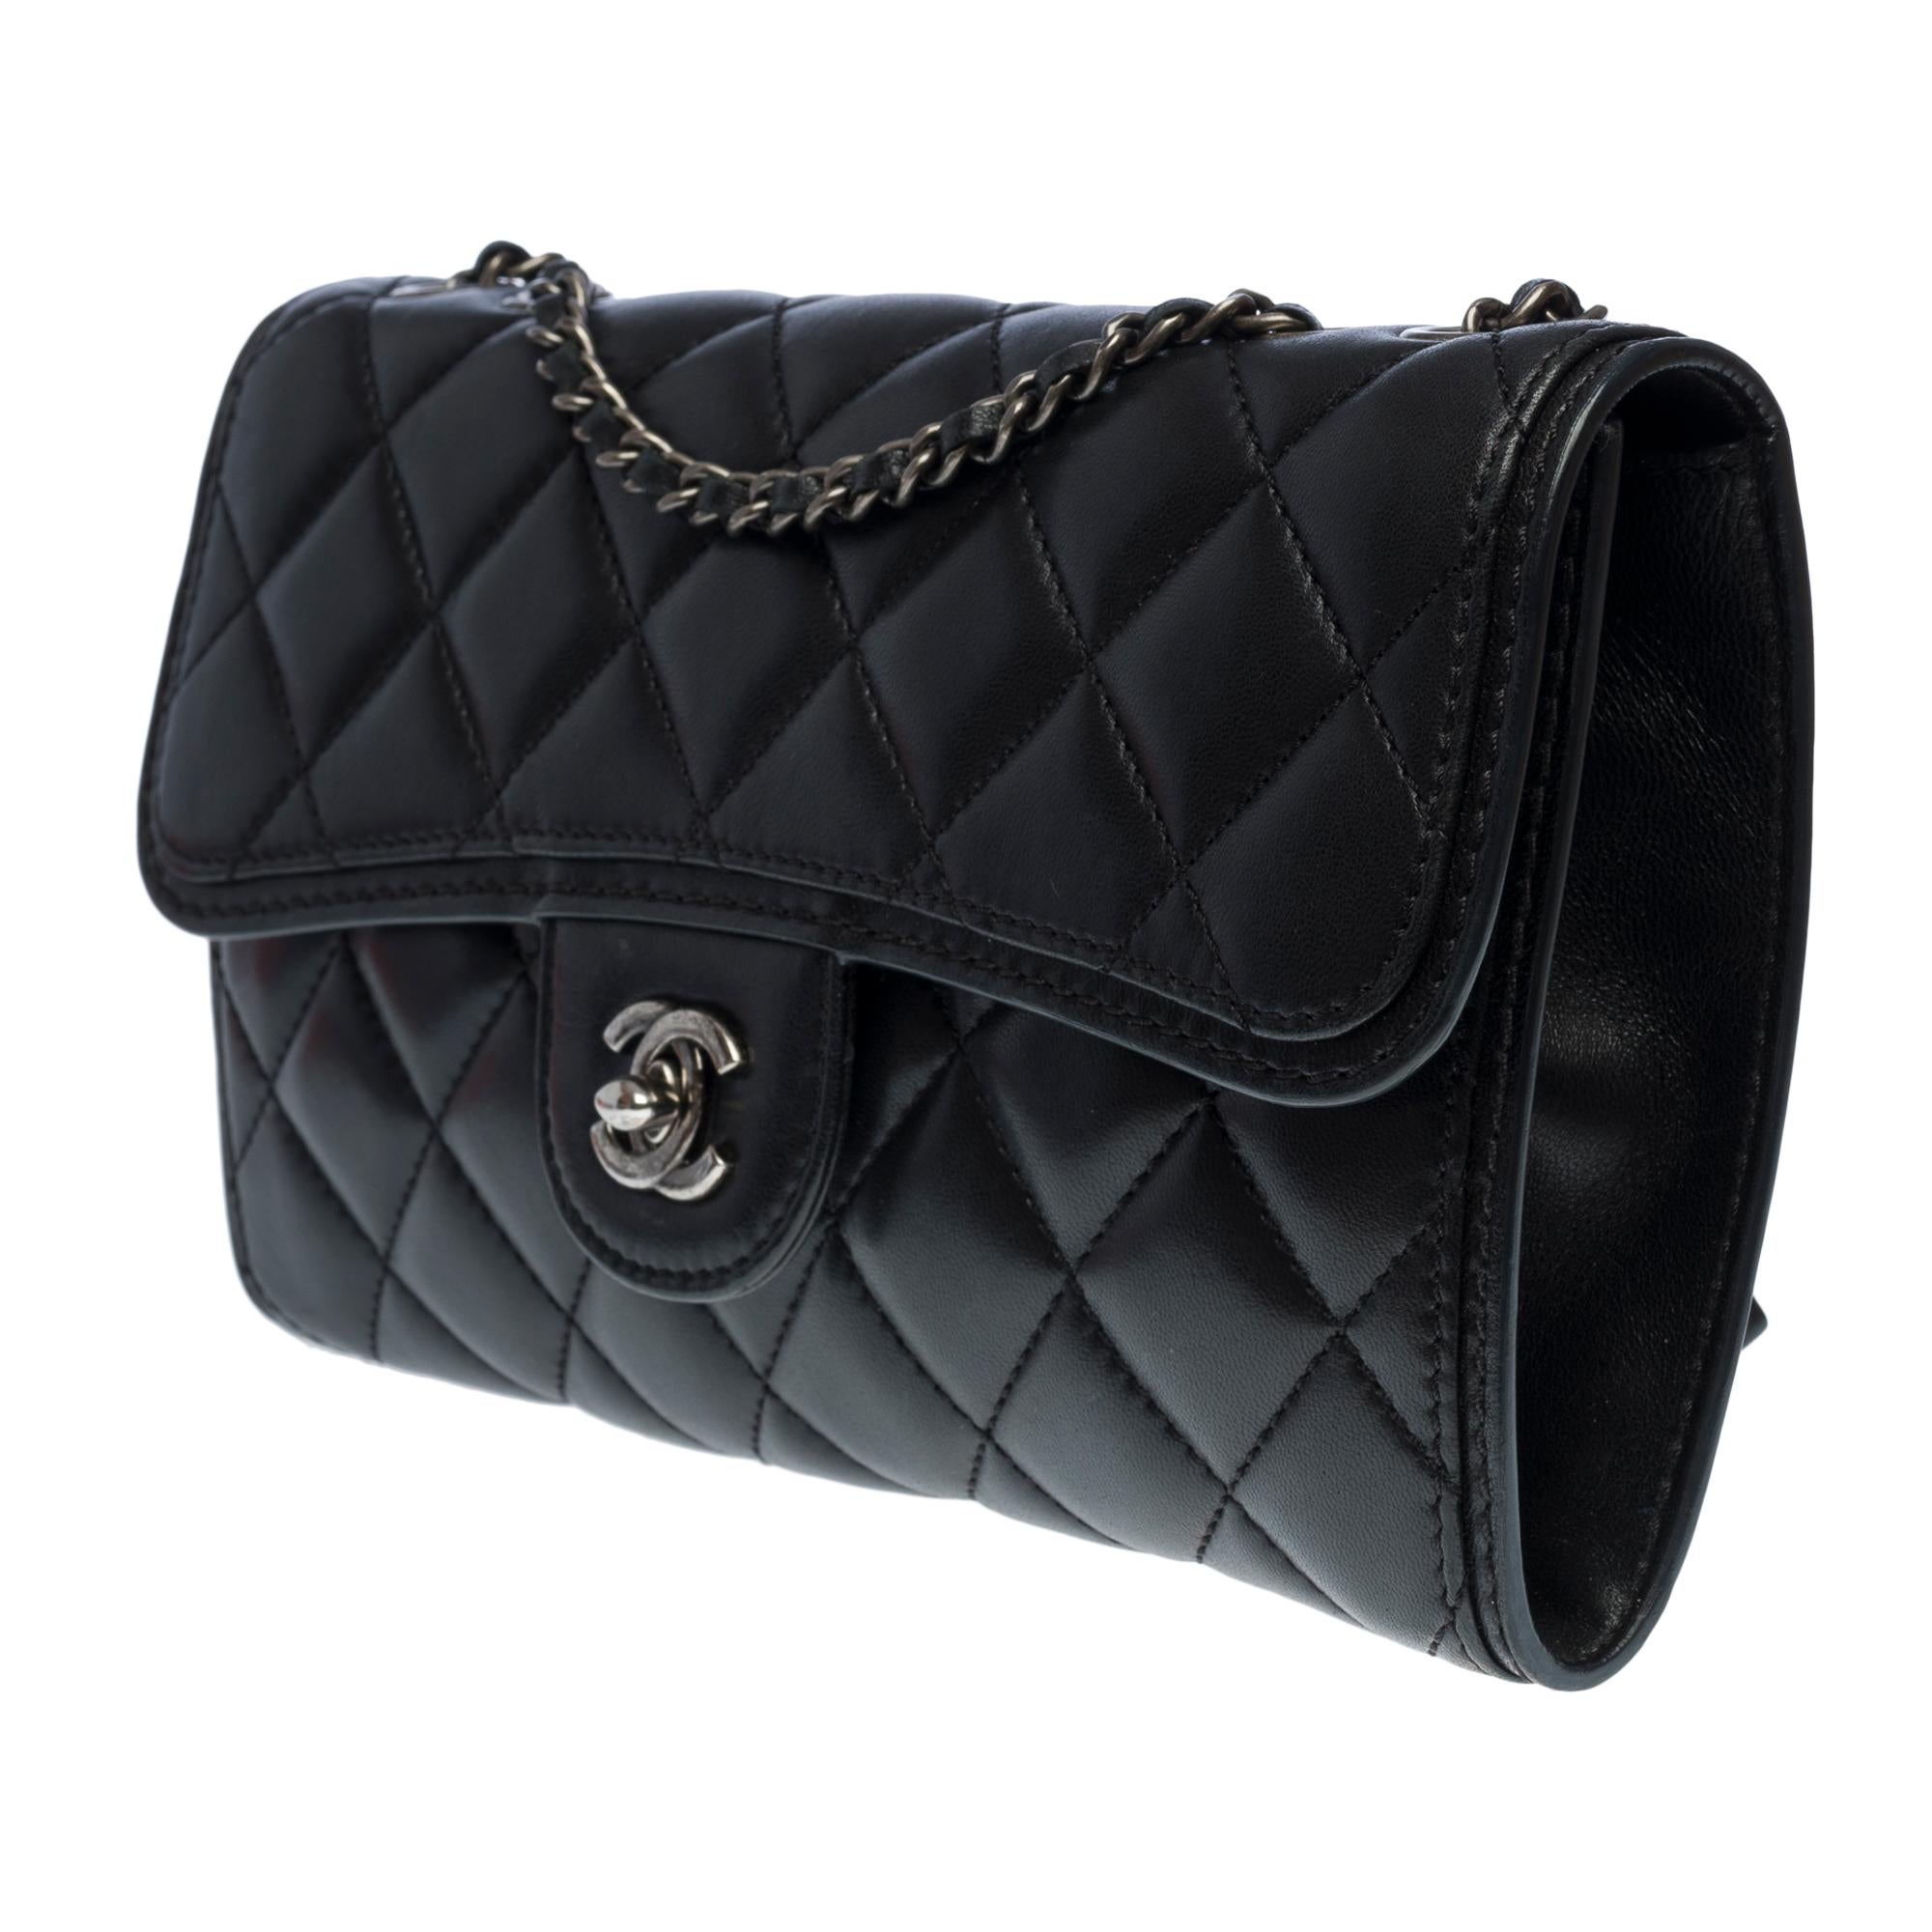 Women's Chanel Classic shoulder flap bag in black quilted lambskin leather, RHW For Sale